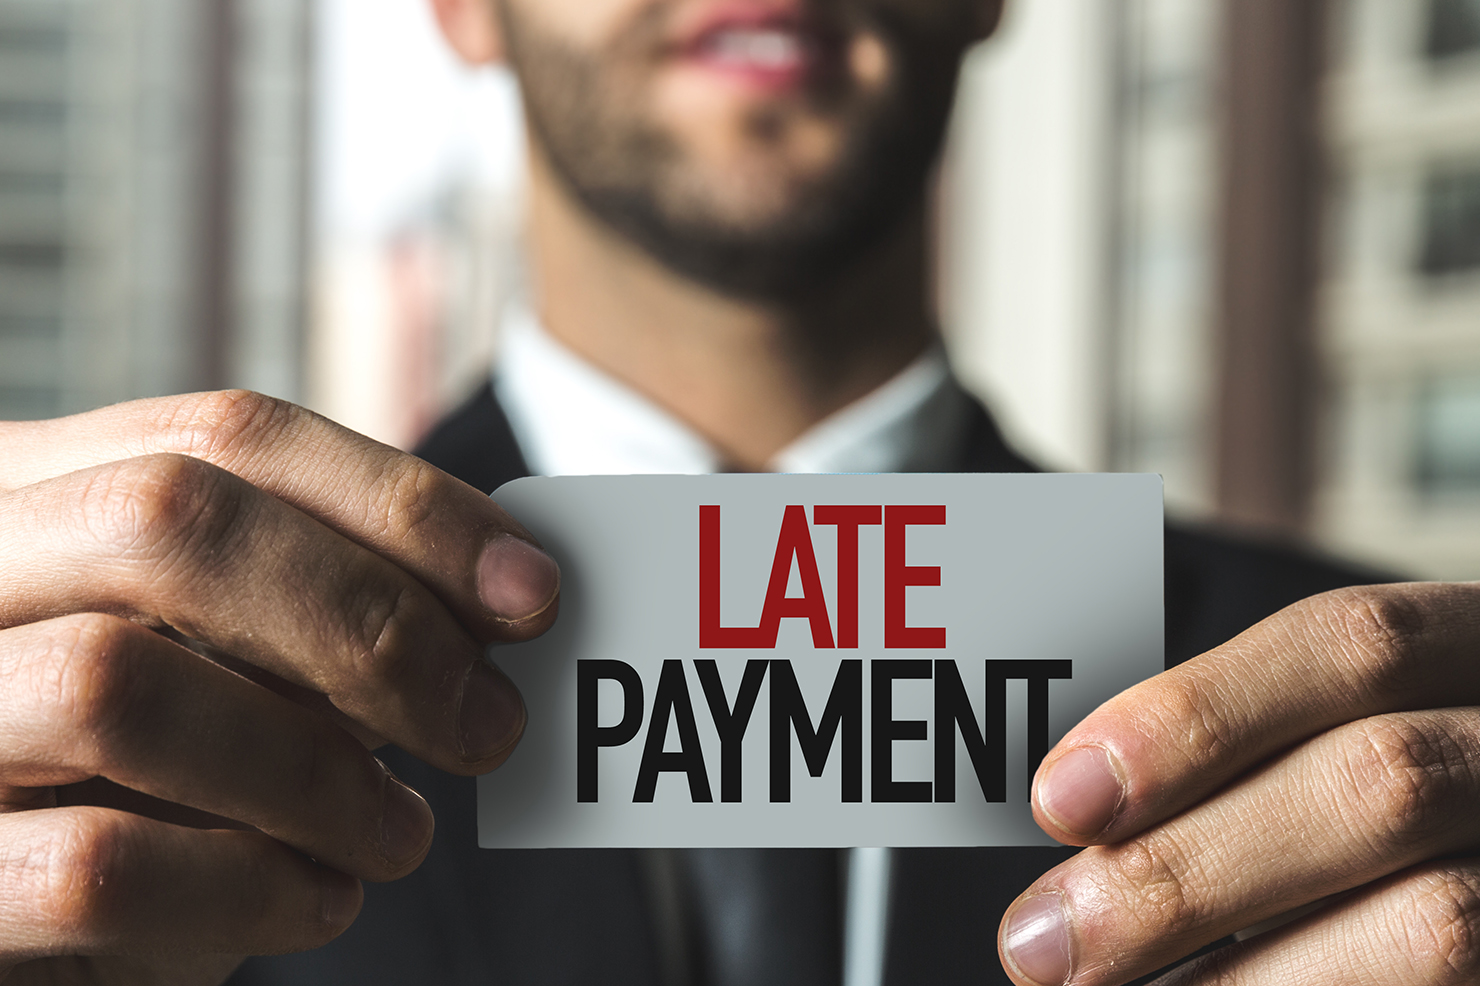 6 Common Business Problems a Rental Asset Management System Can Solve - Delayed Payments